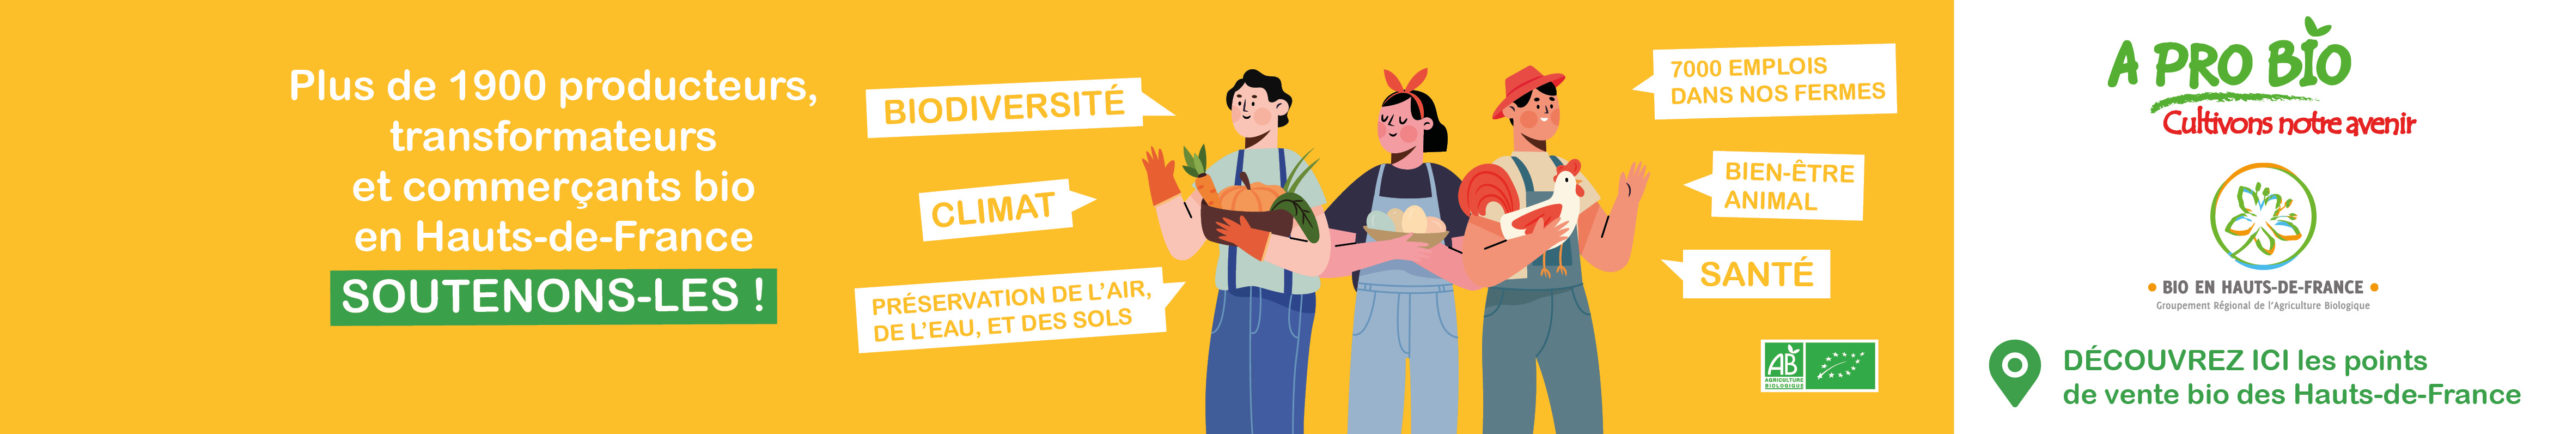 Manger bio local - couverture In